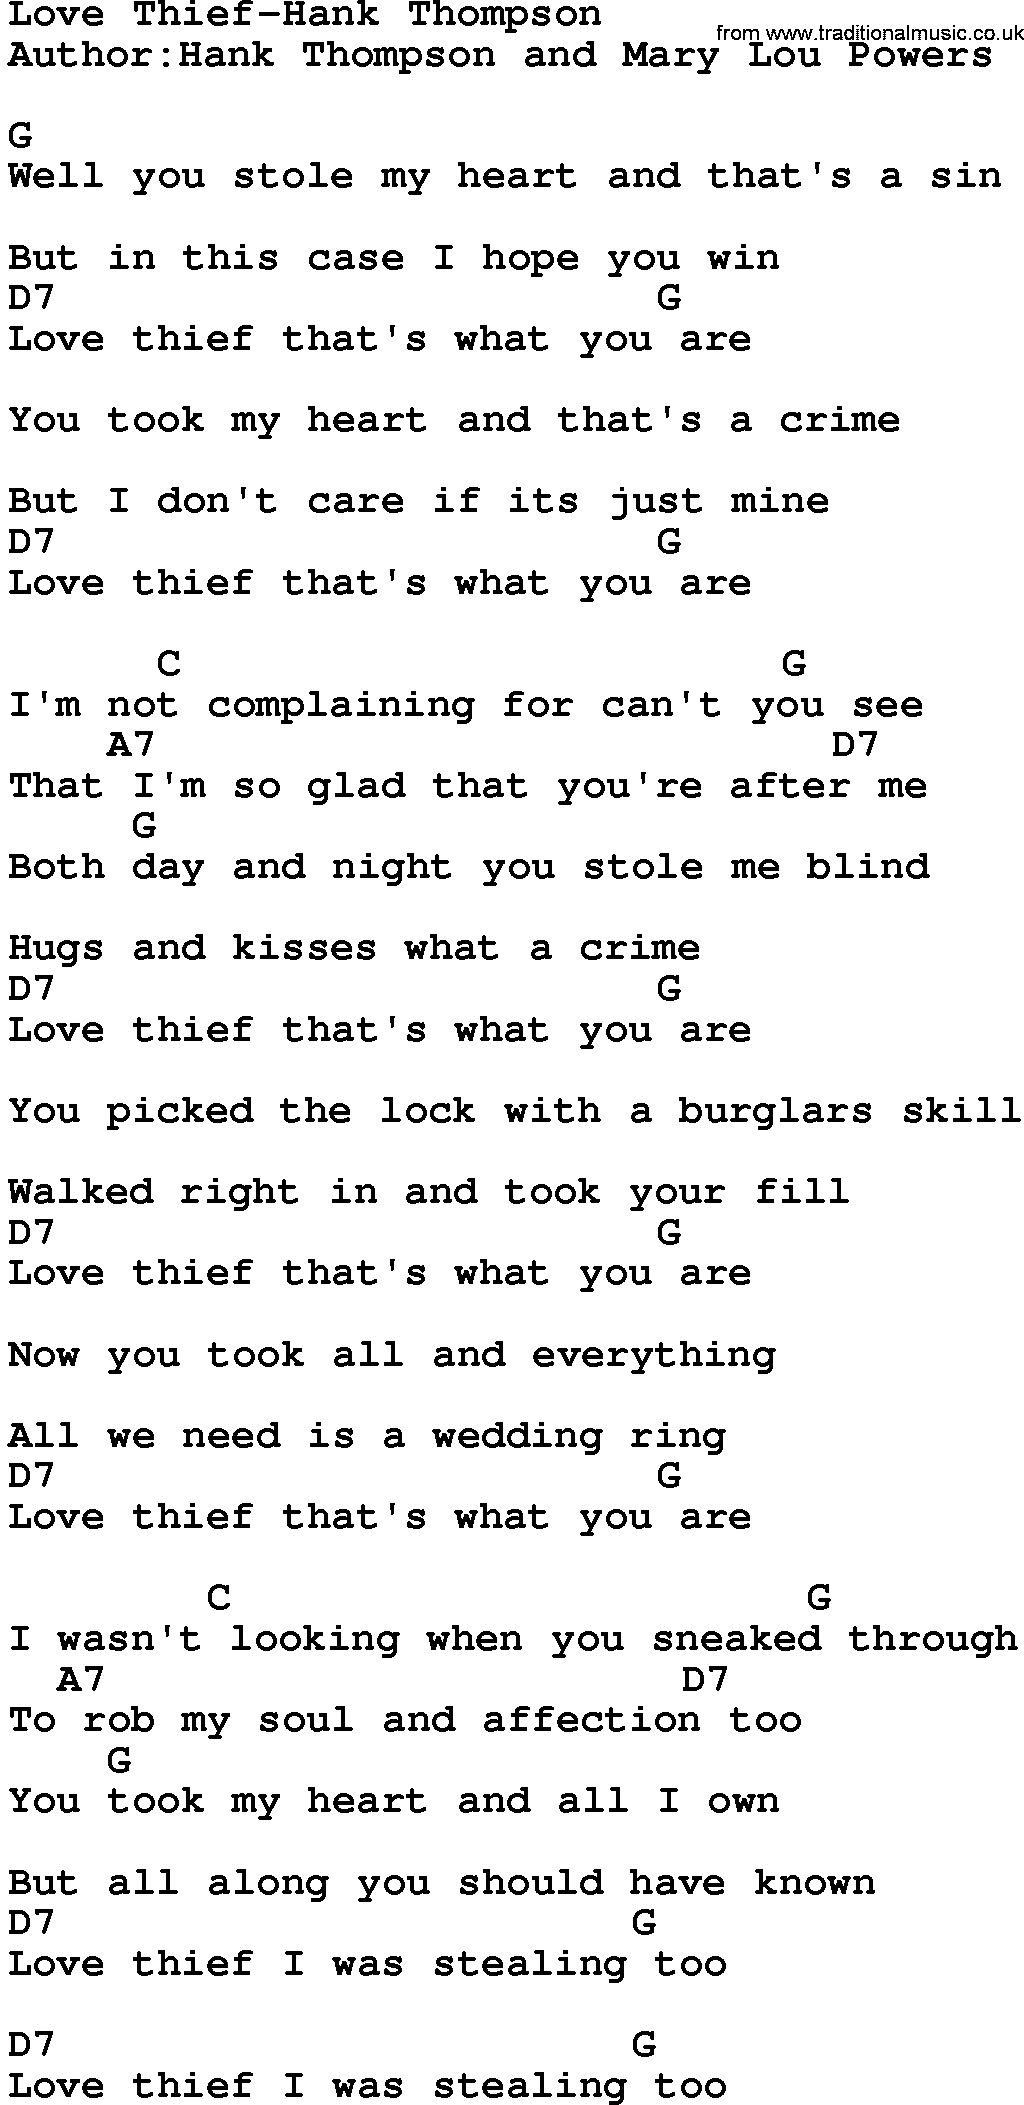 Country music song: Love Thief-Hank Thompson lyrics and chords